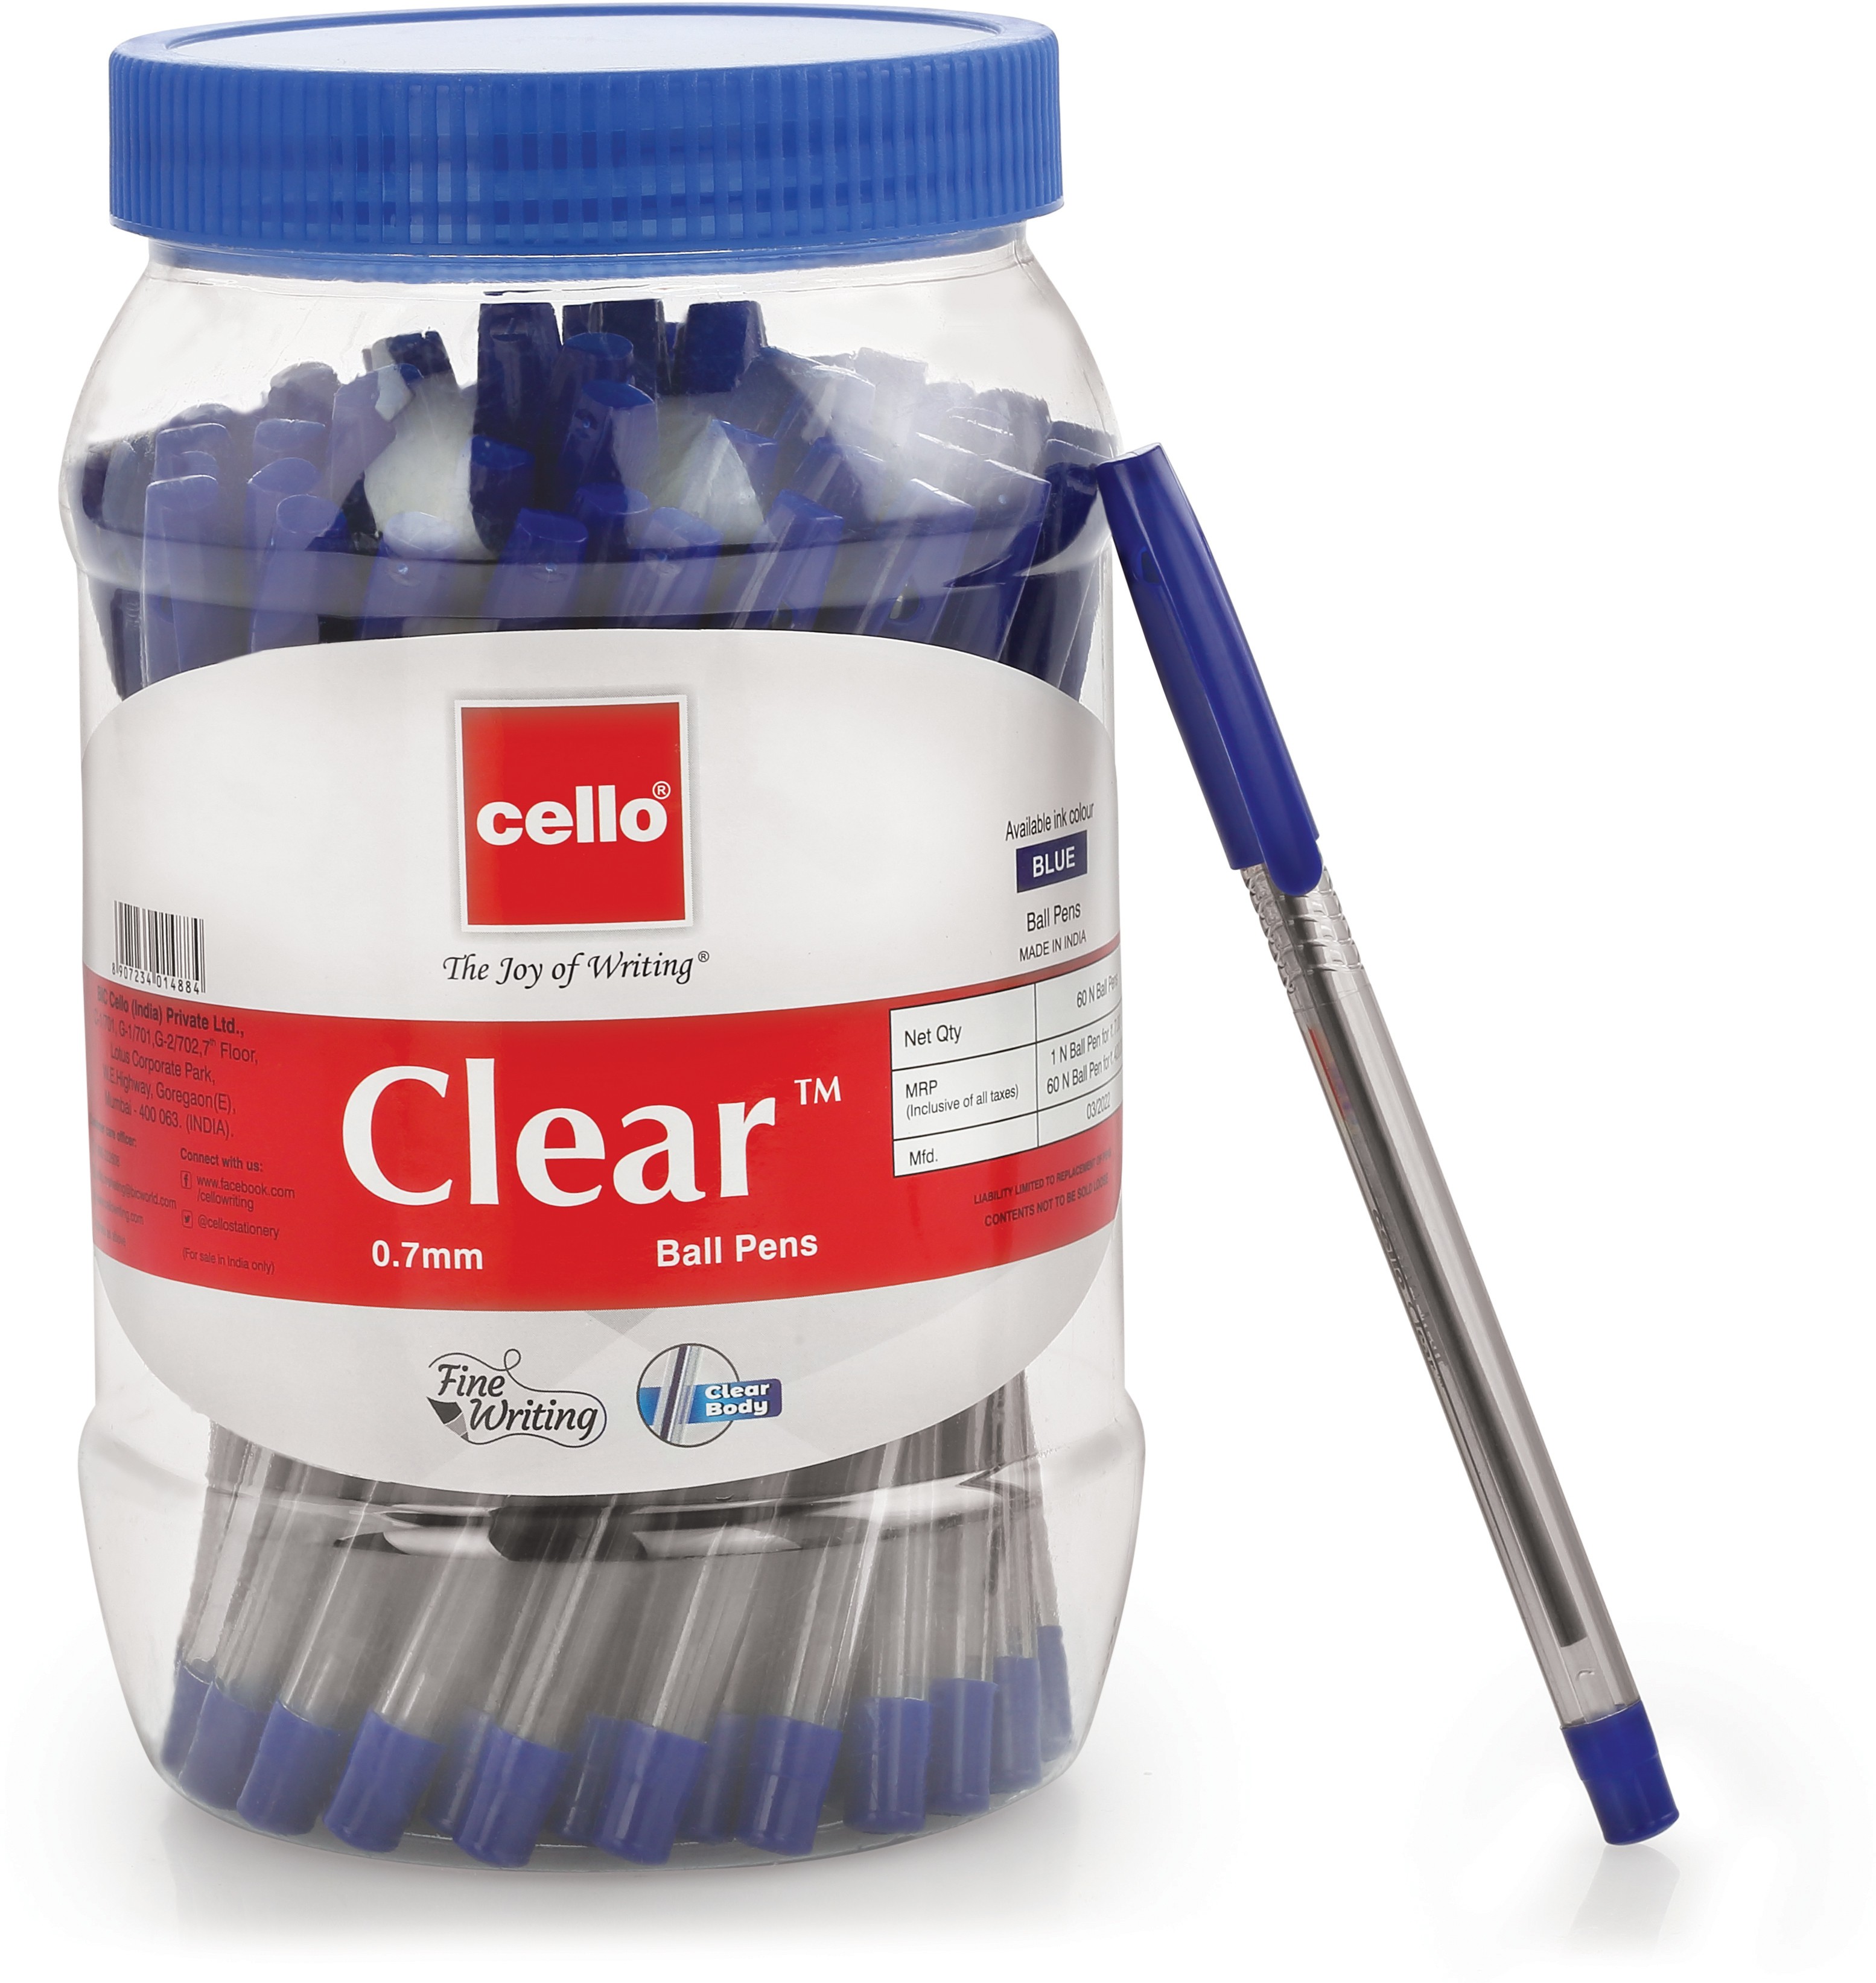 Cello Clear Jar of Ball Pen (Pack of 60, Blue)